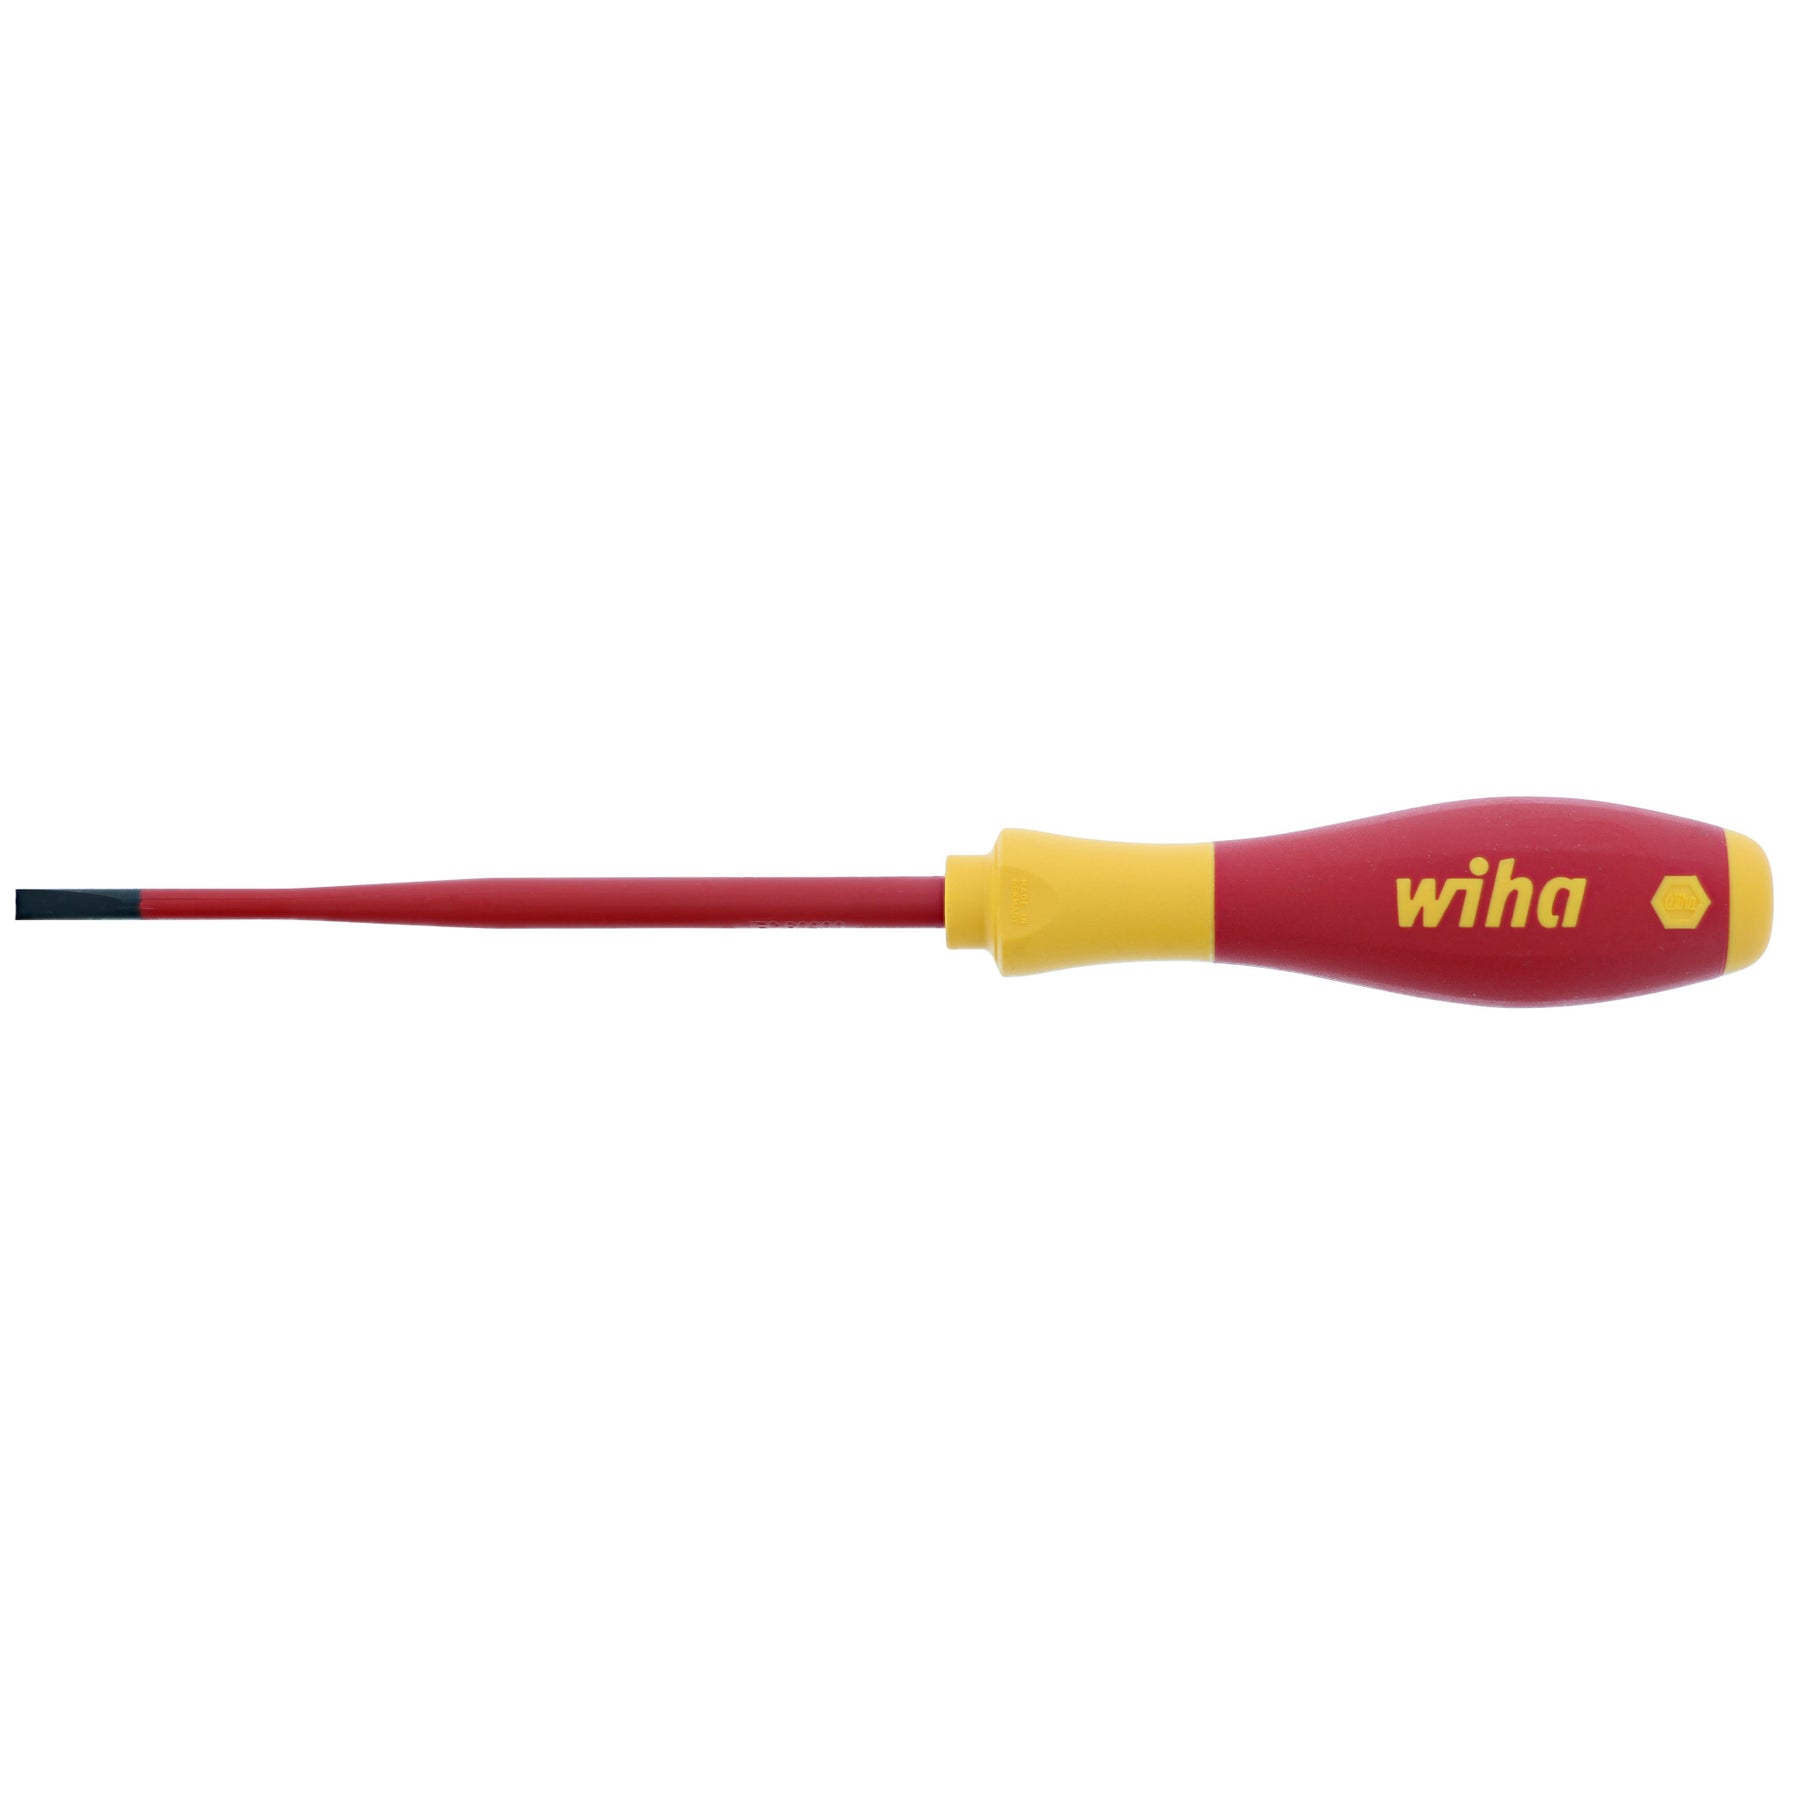 Insulated SlimLine Slotted Screwdriver 4.5mm x 125mm